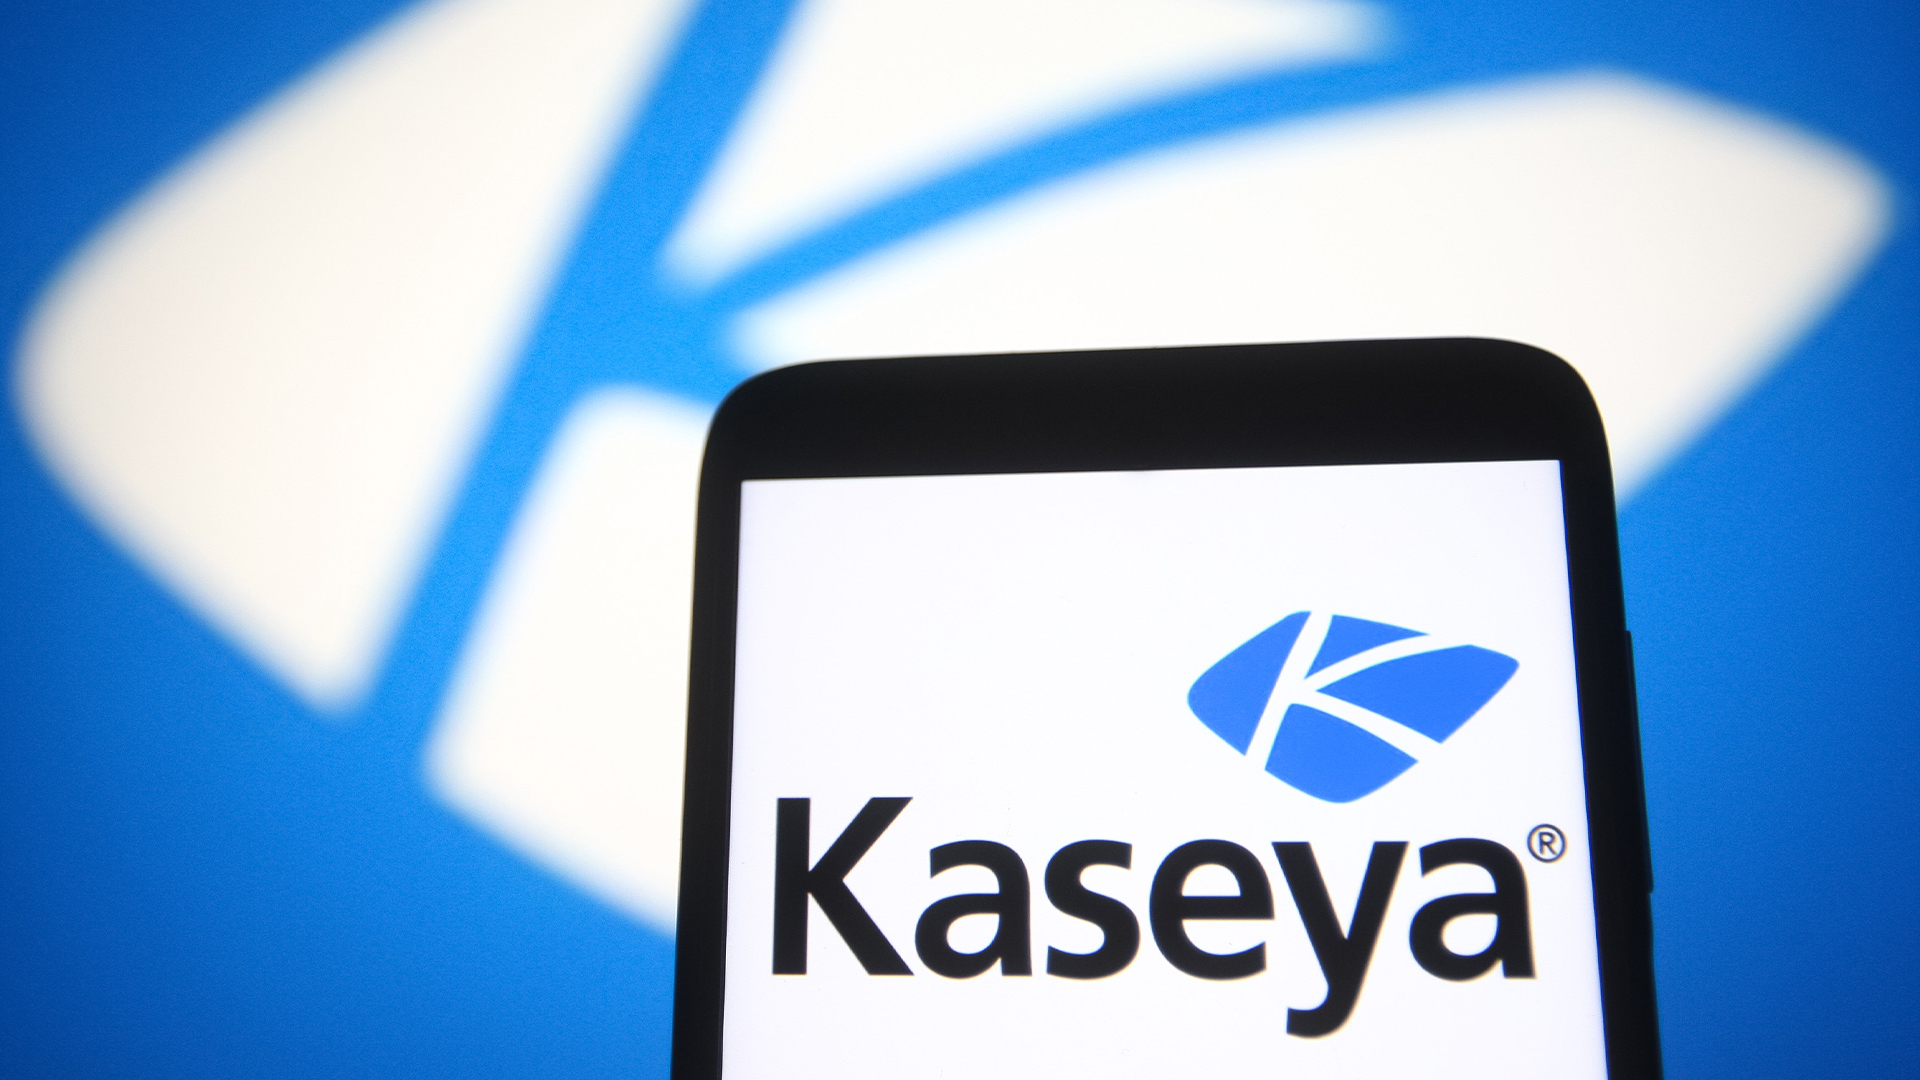 Kaseya: Cybersecurity remains one of the main revenue drivers for MSPs